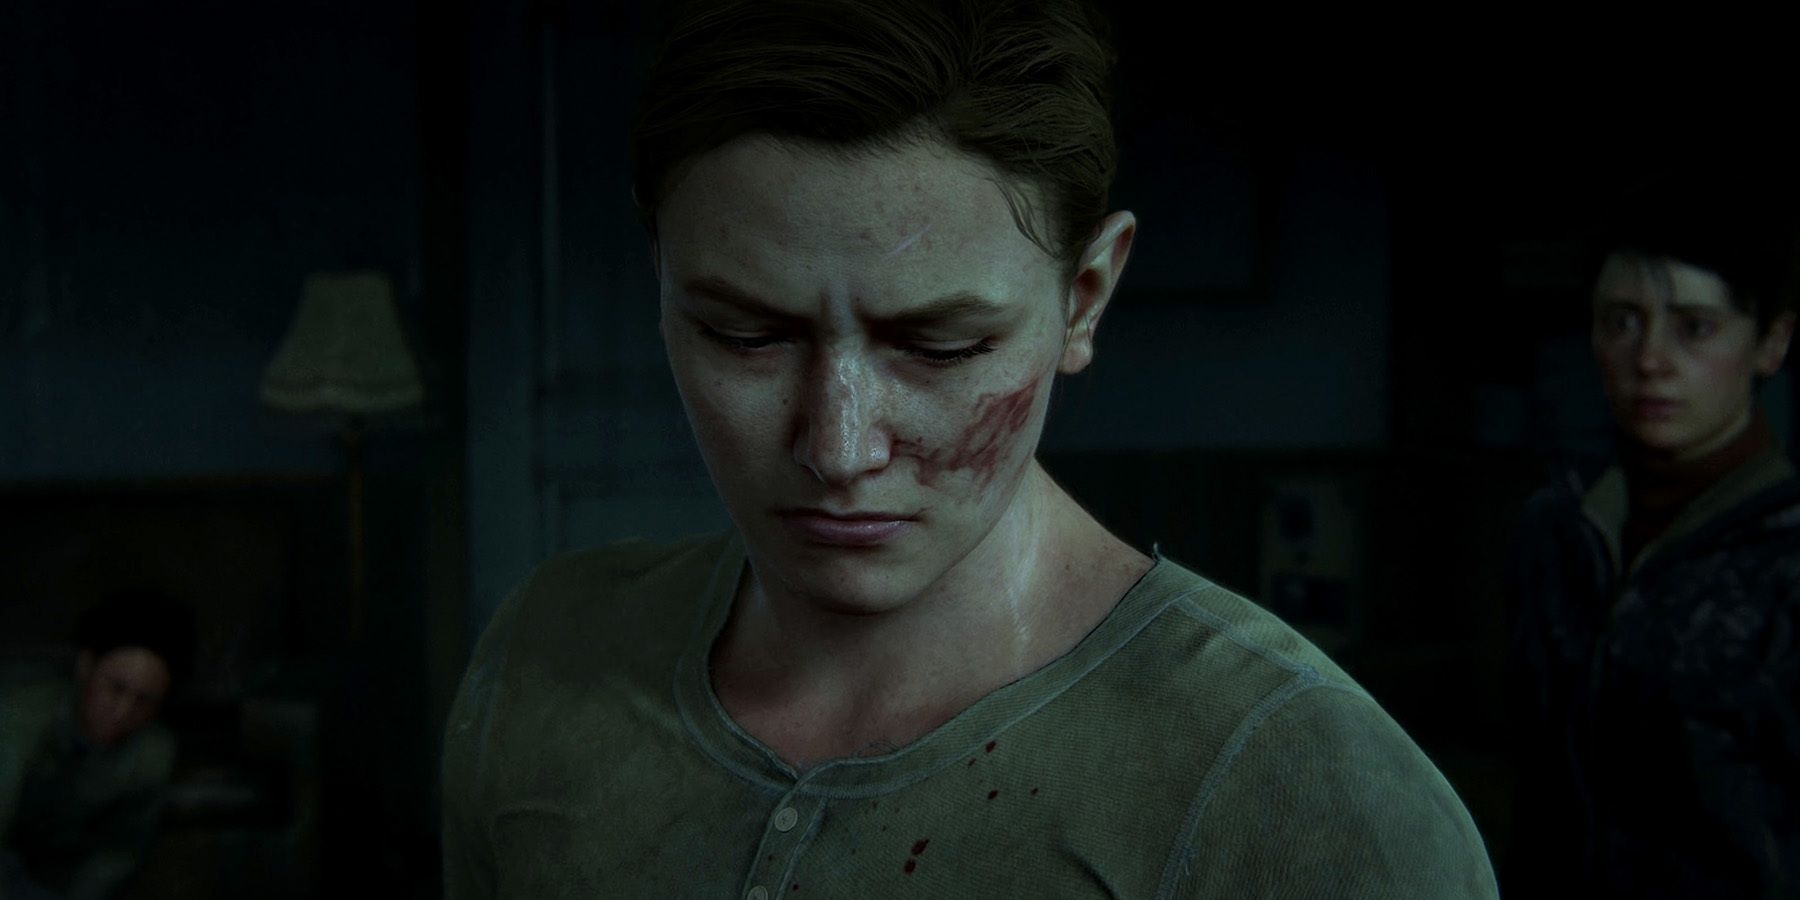 The Last of Us season 2 casts controversial character Abby